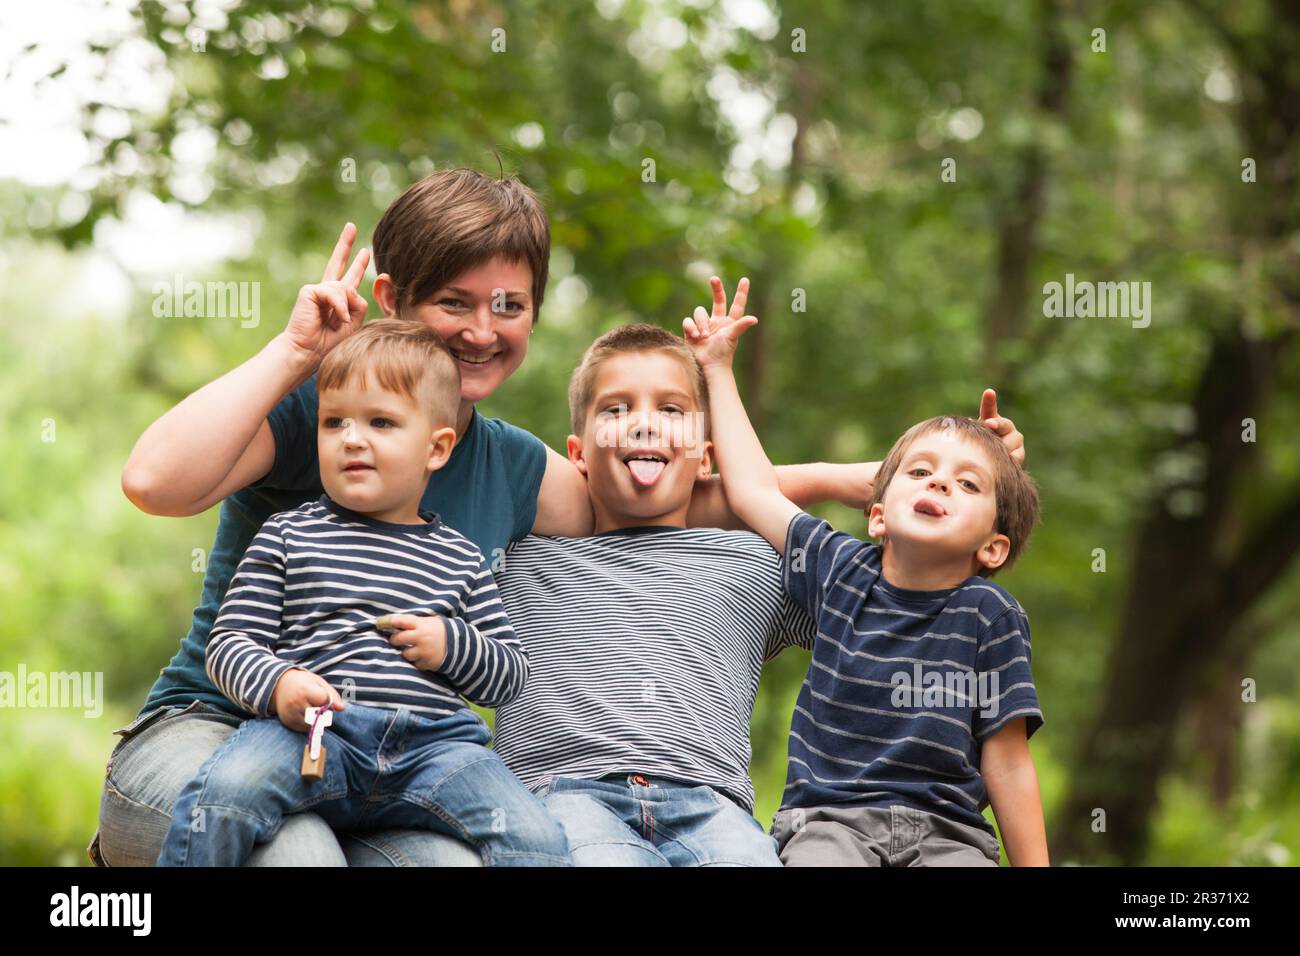 Mother with sons outdoors Stock Photo